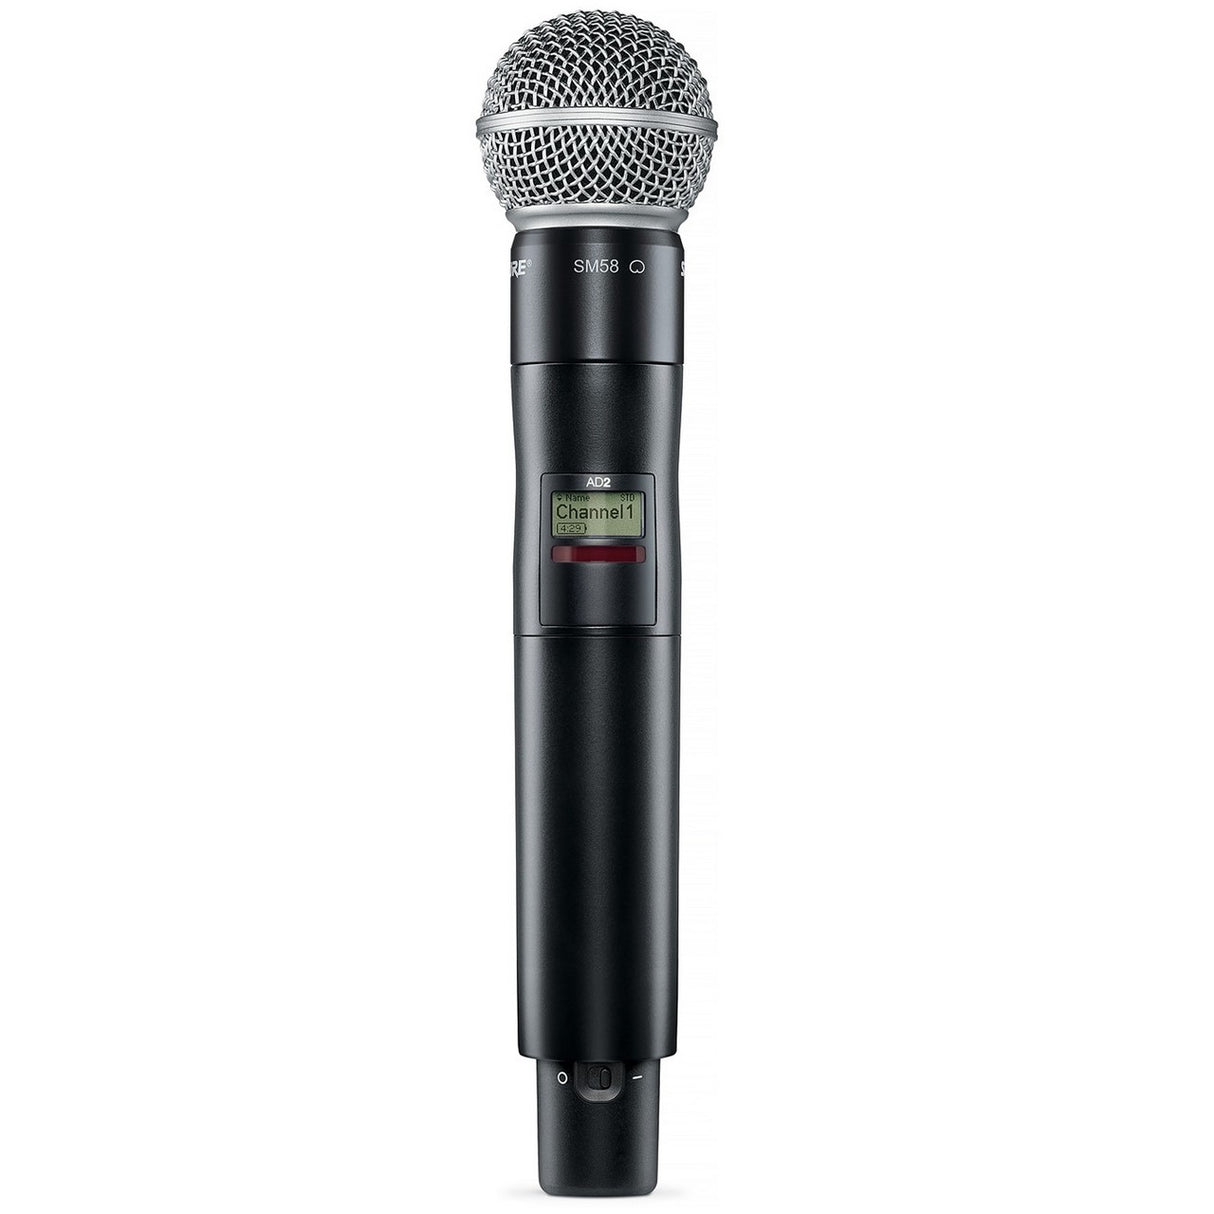 Shure AD2/SM58 Axient Handheld Wireless Microphone Transmitter